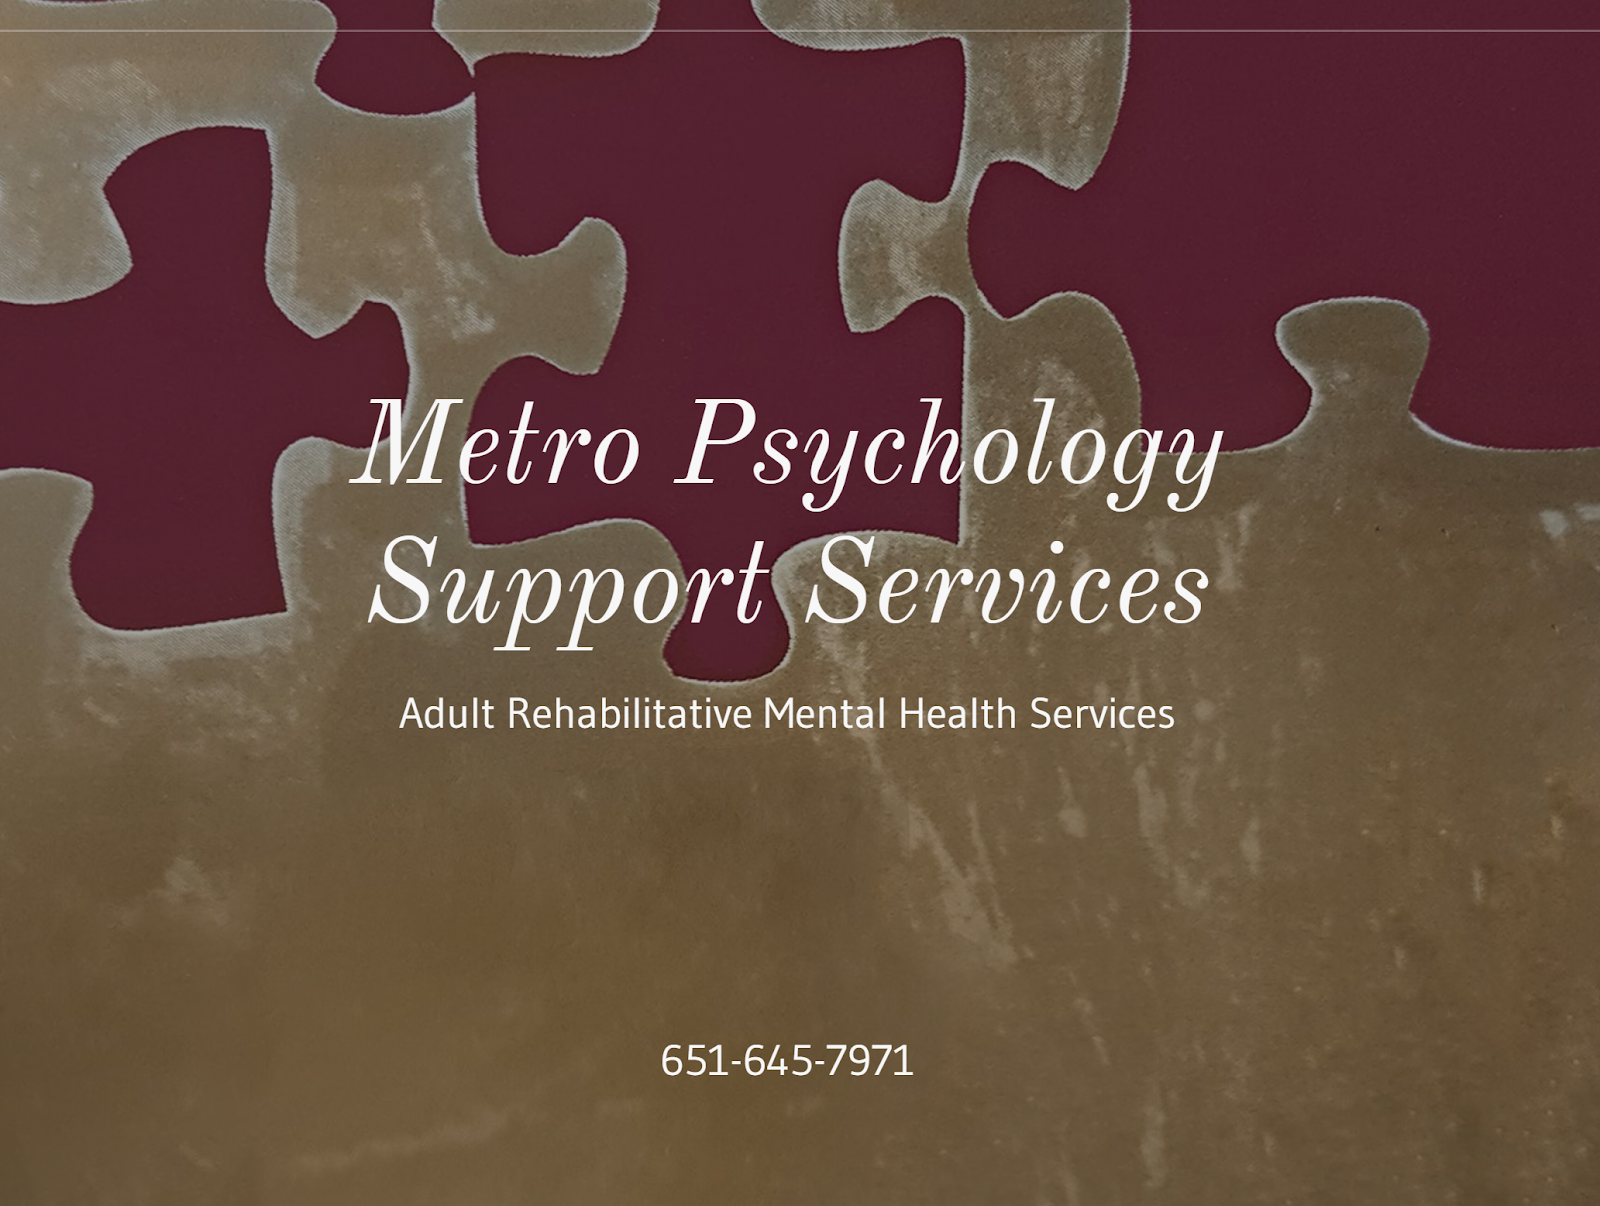 Metro Psychology Support Services